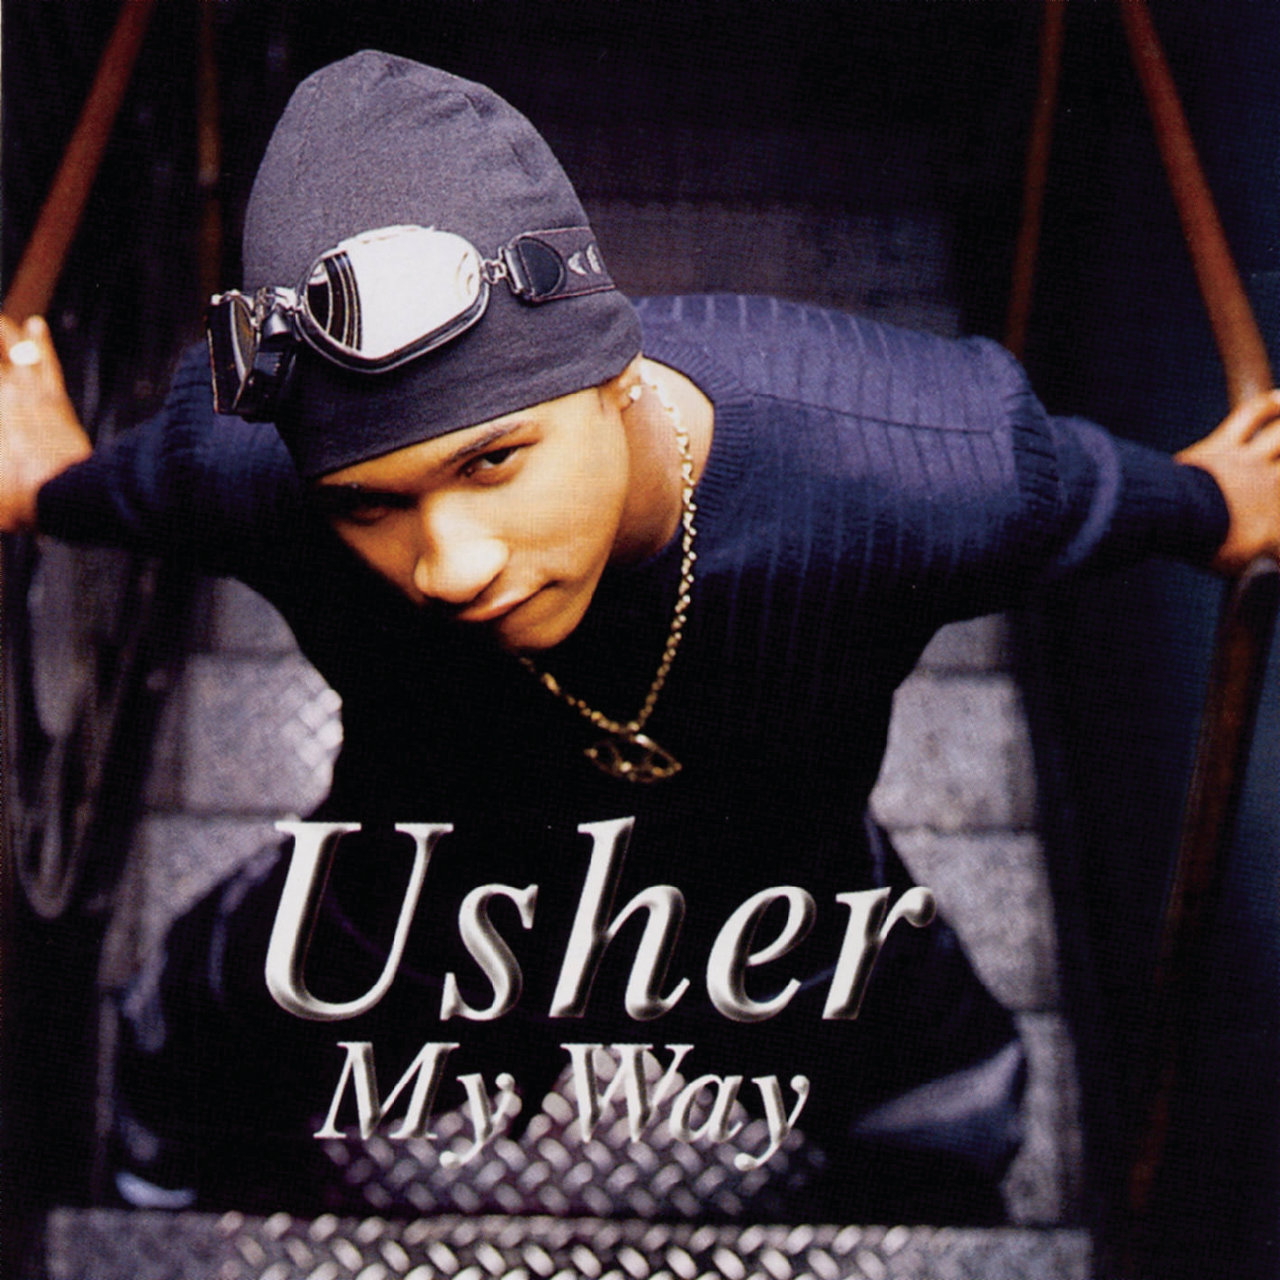 Usher - My Way (Cover)